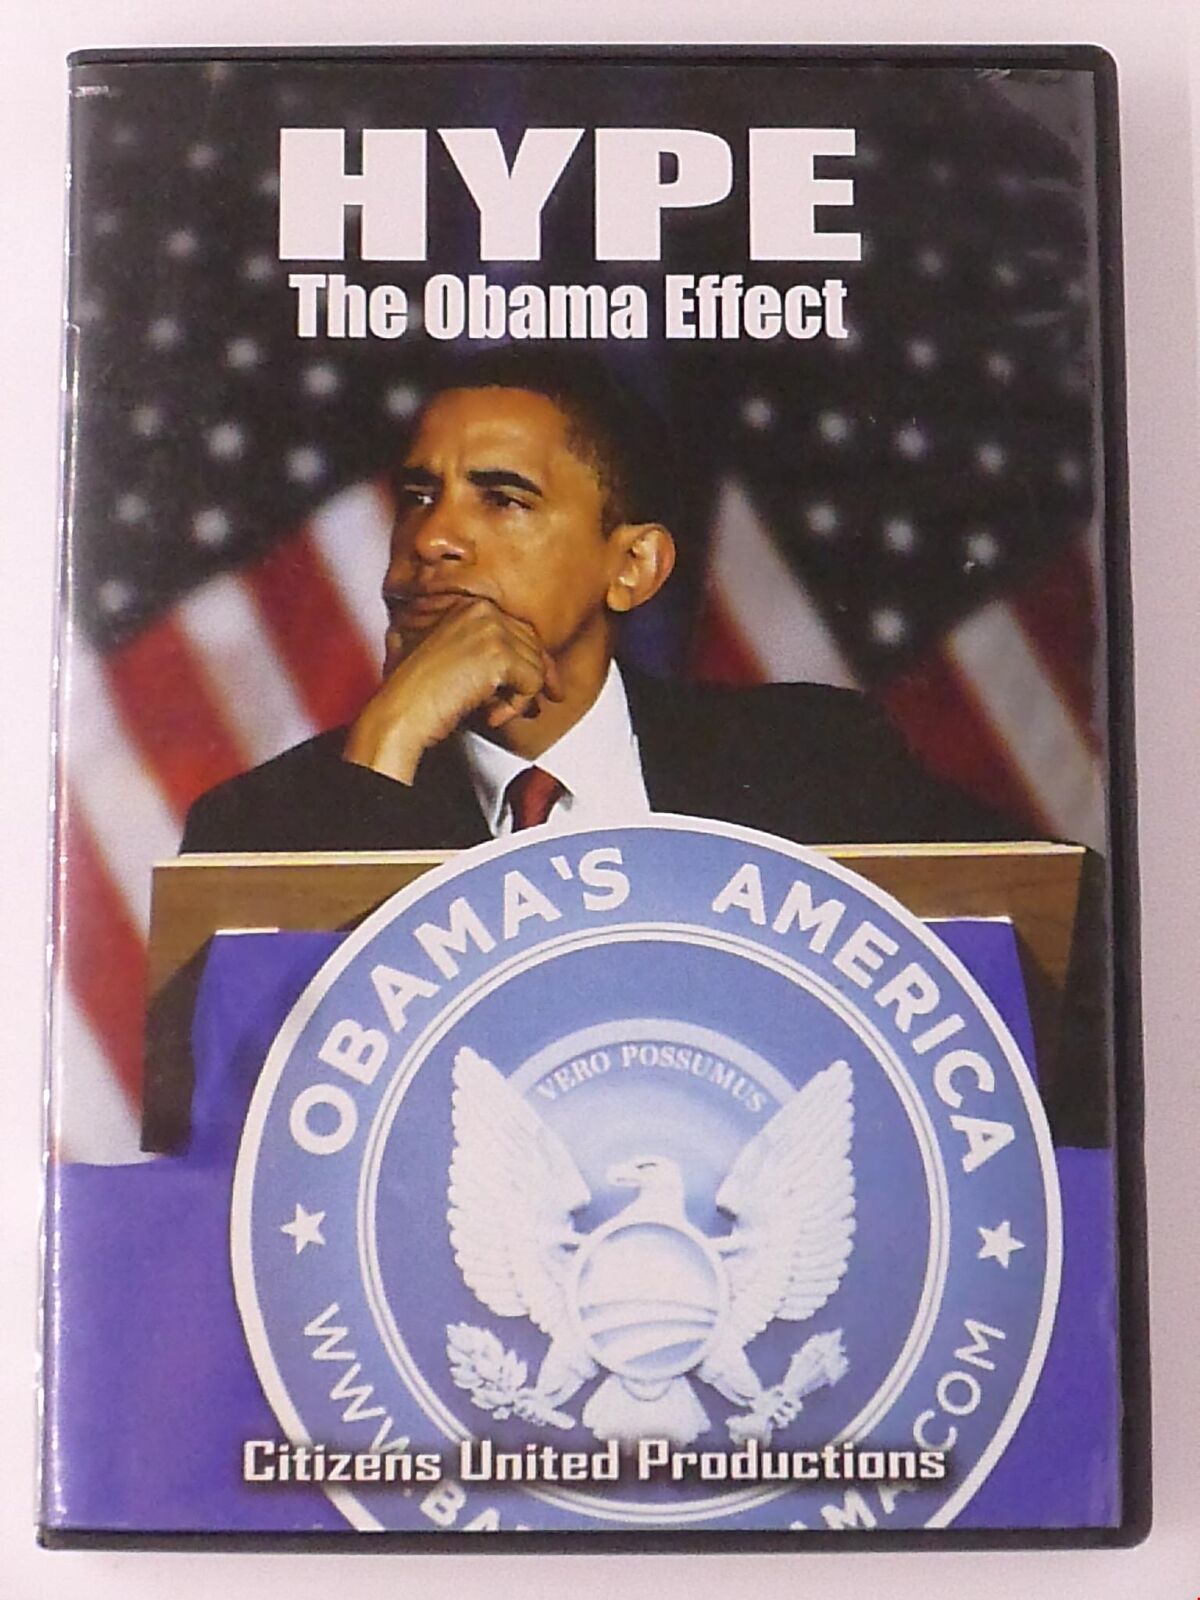 Hype - The Obama Effect (DVD, 2008) - I0123